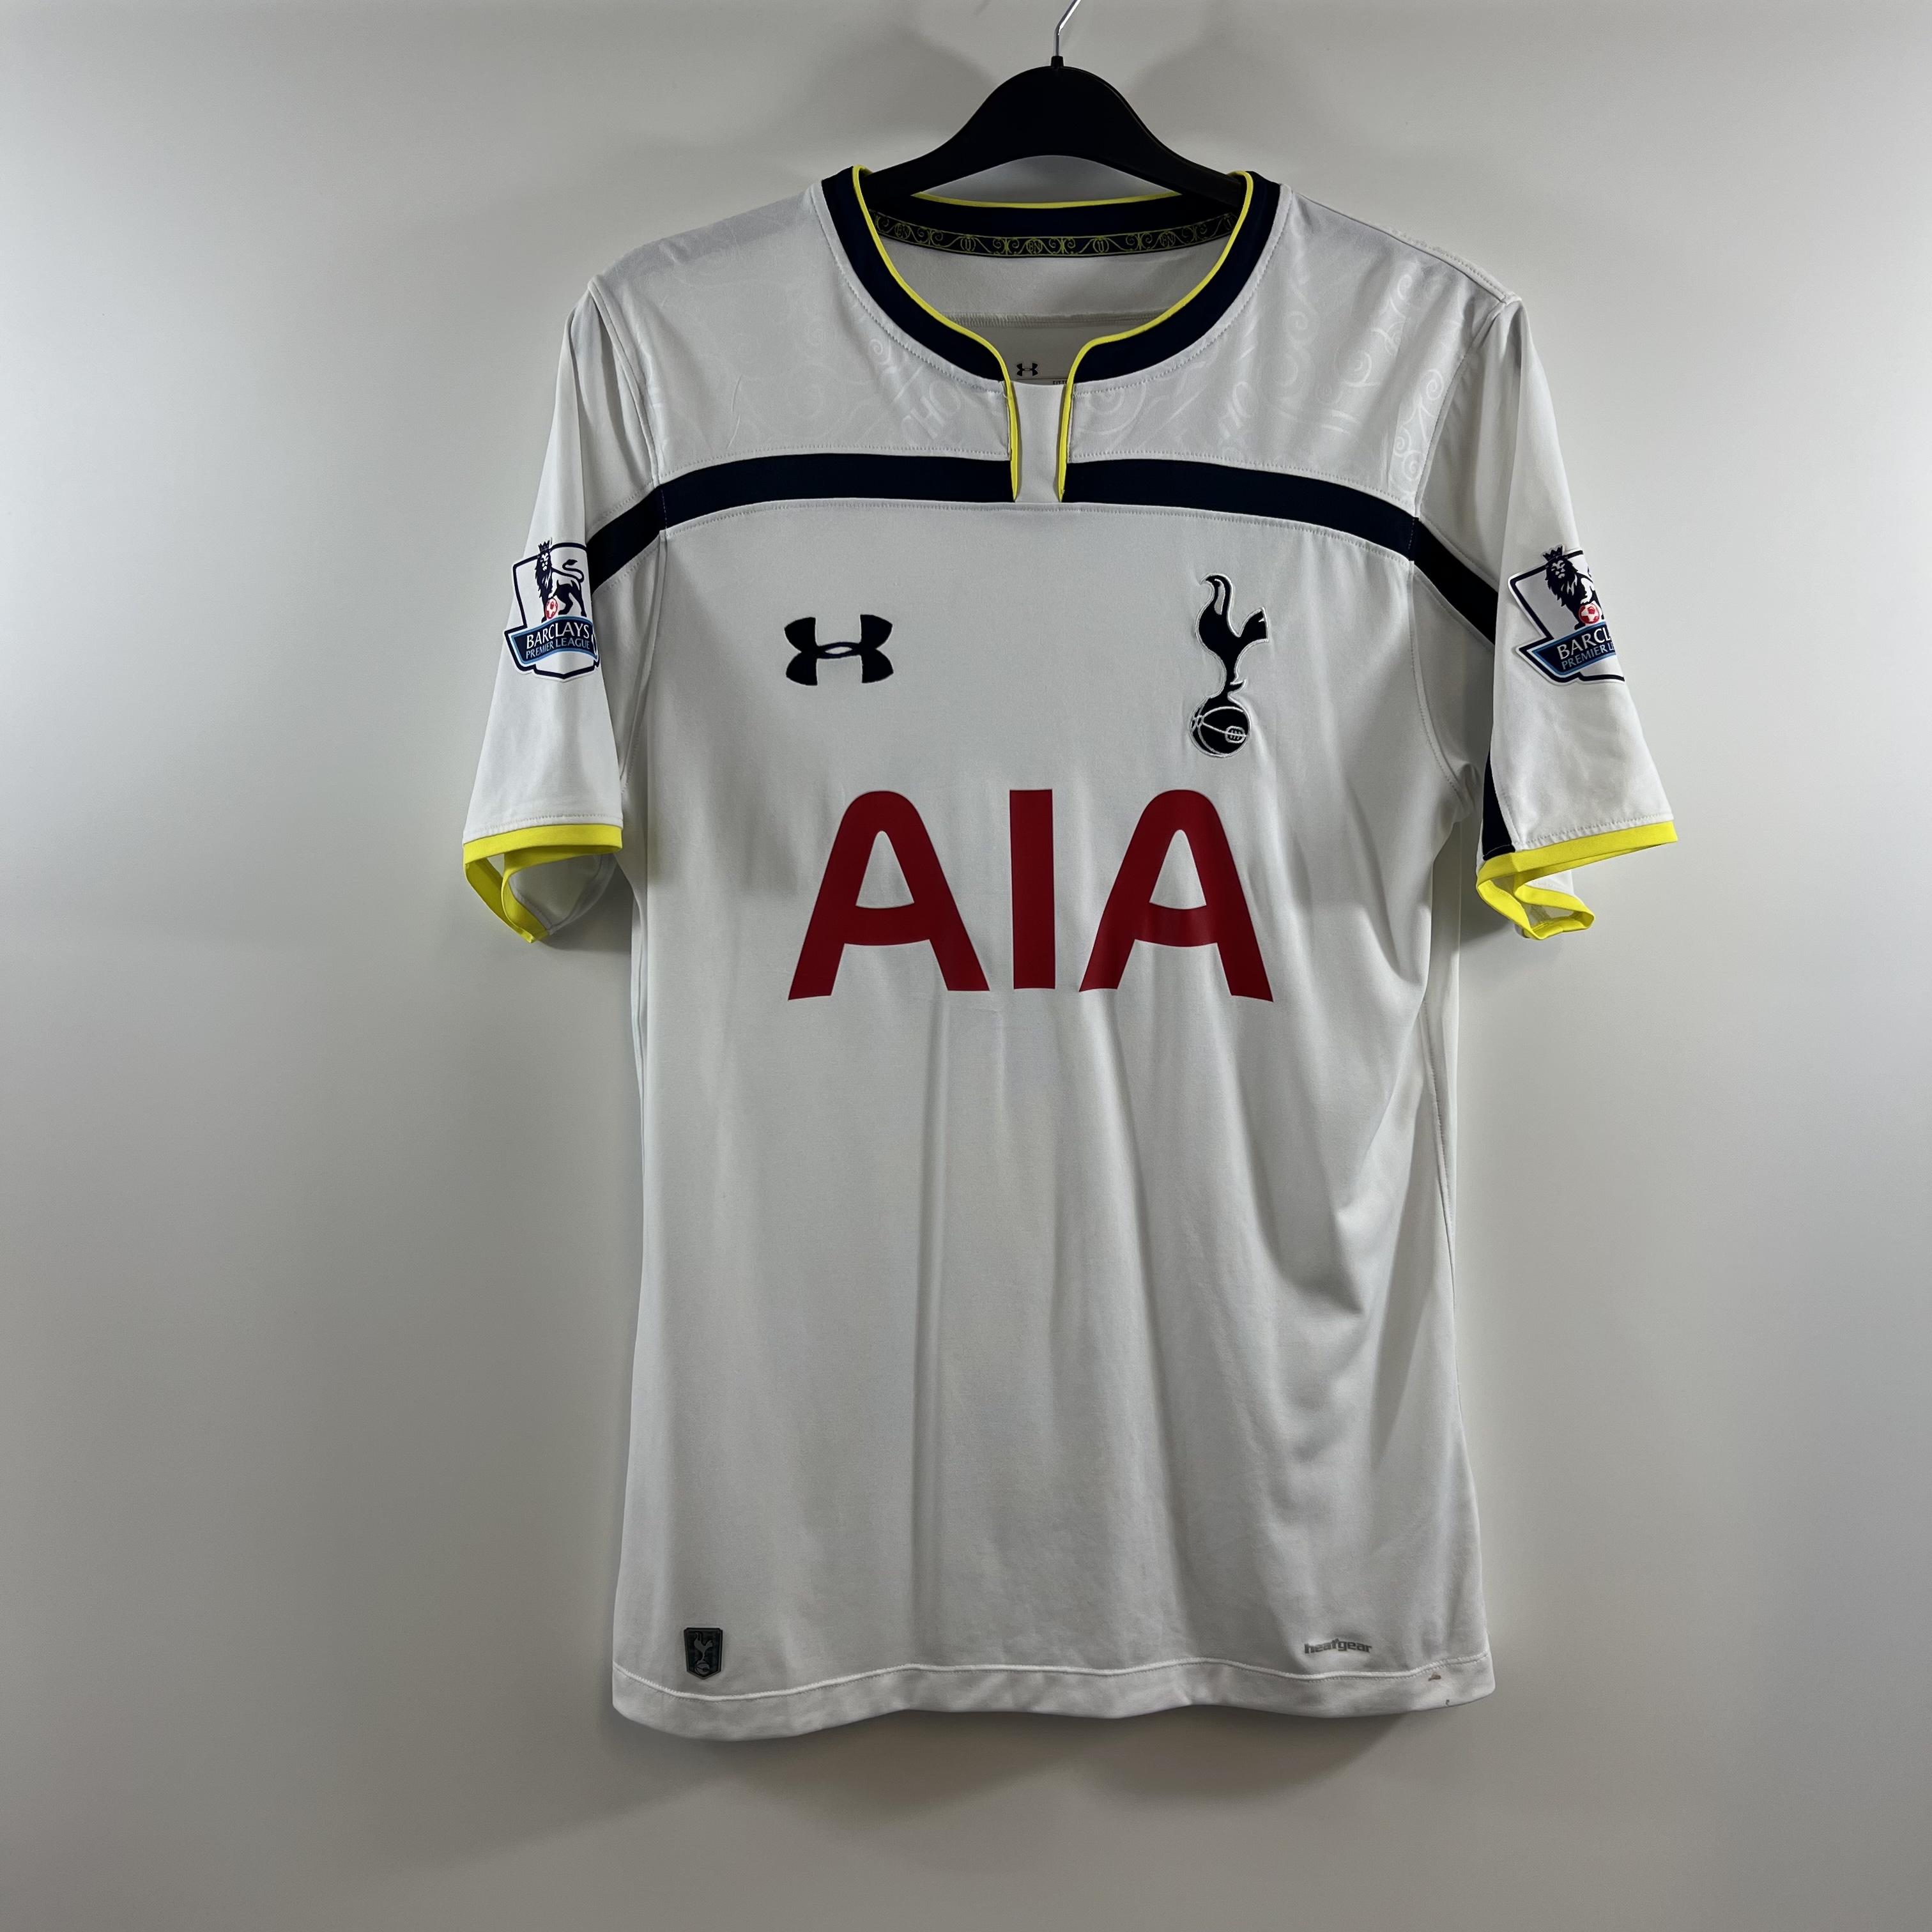 2014-15 Tottenham Under Armour Fitted Home Shirt *w/tags* L 377061-01